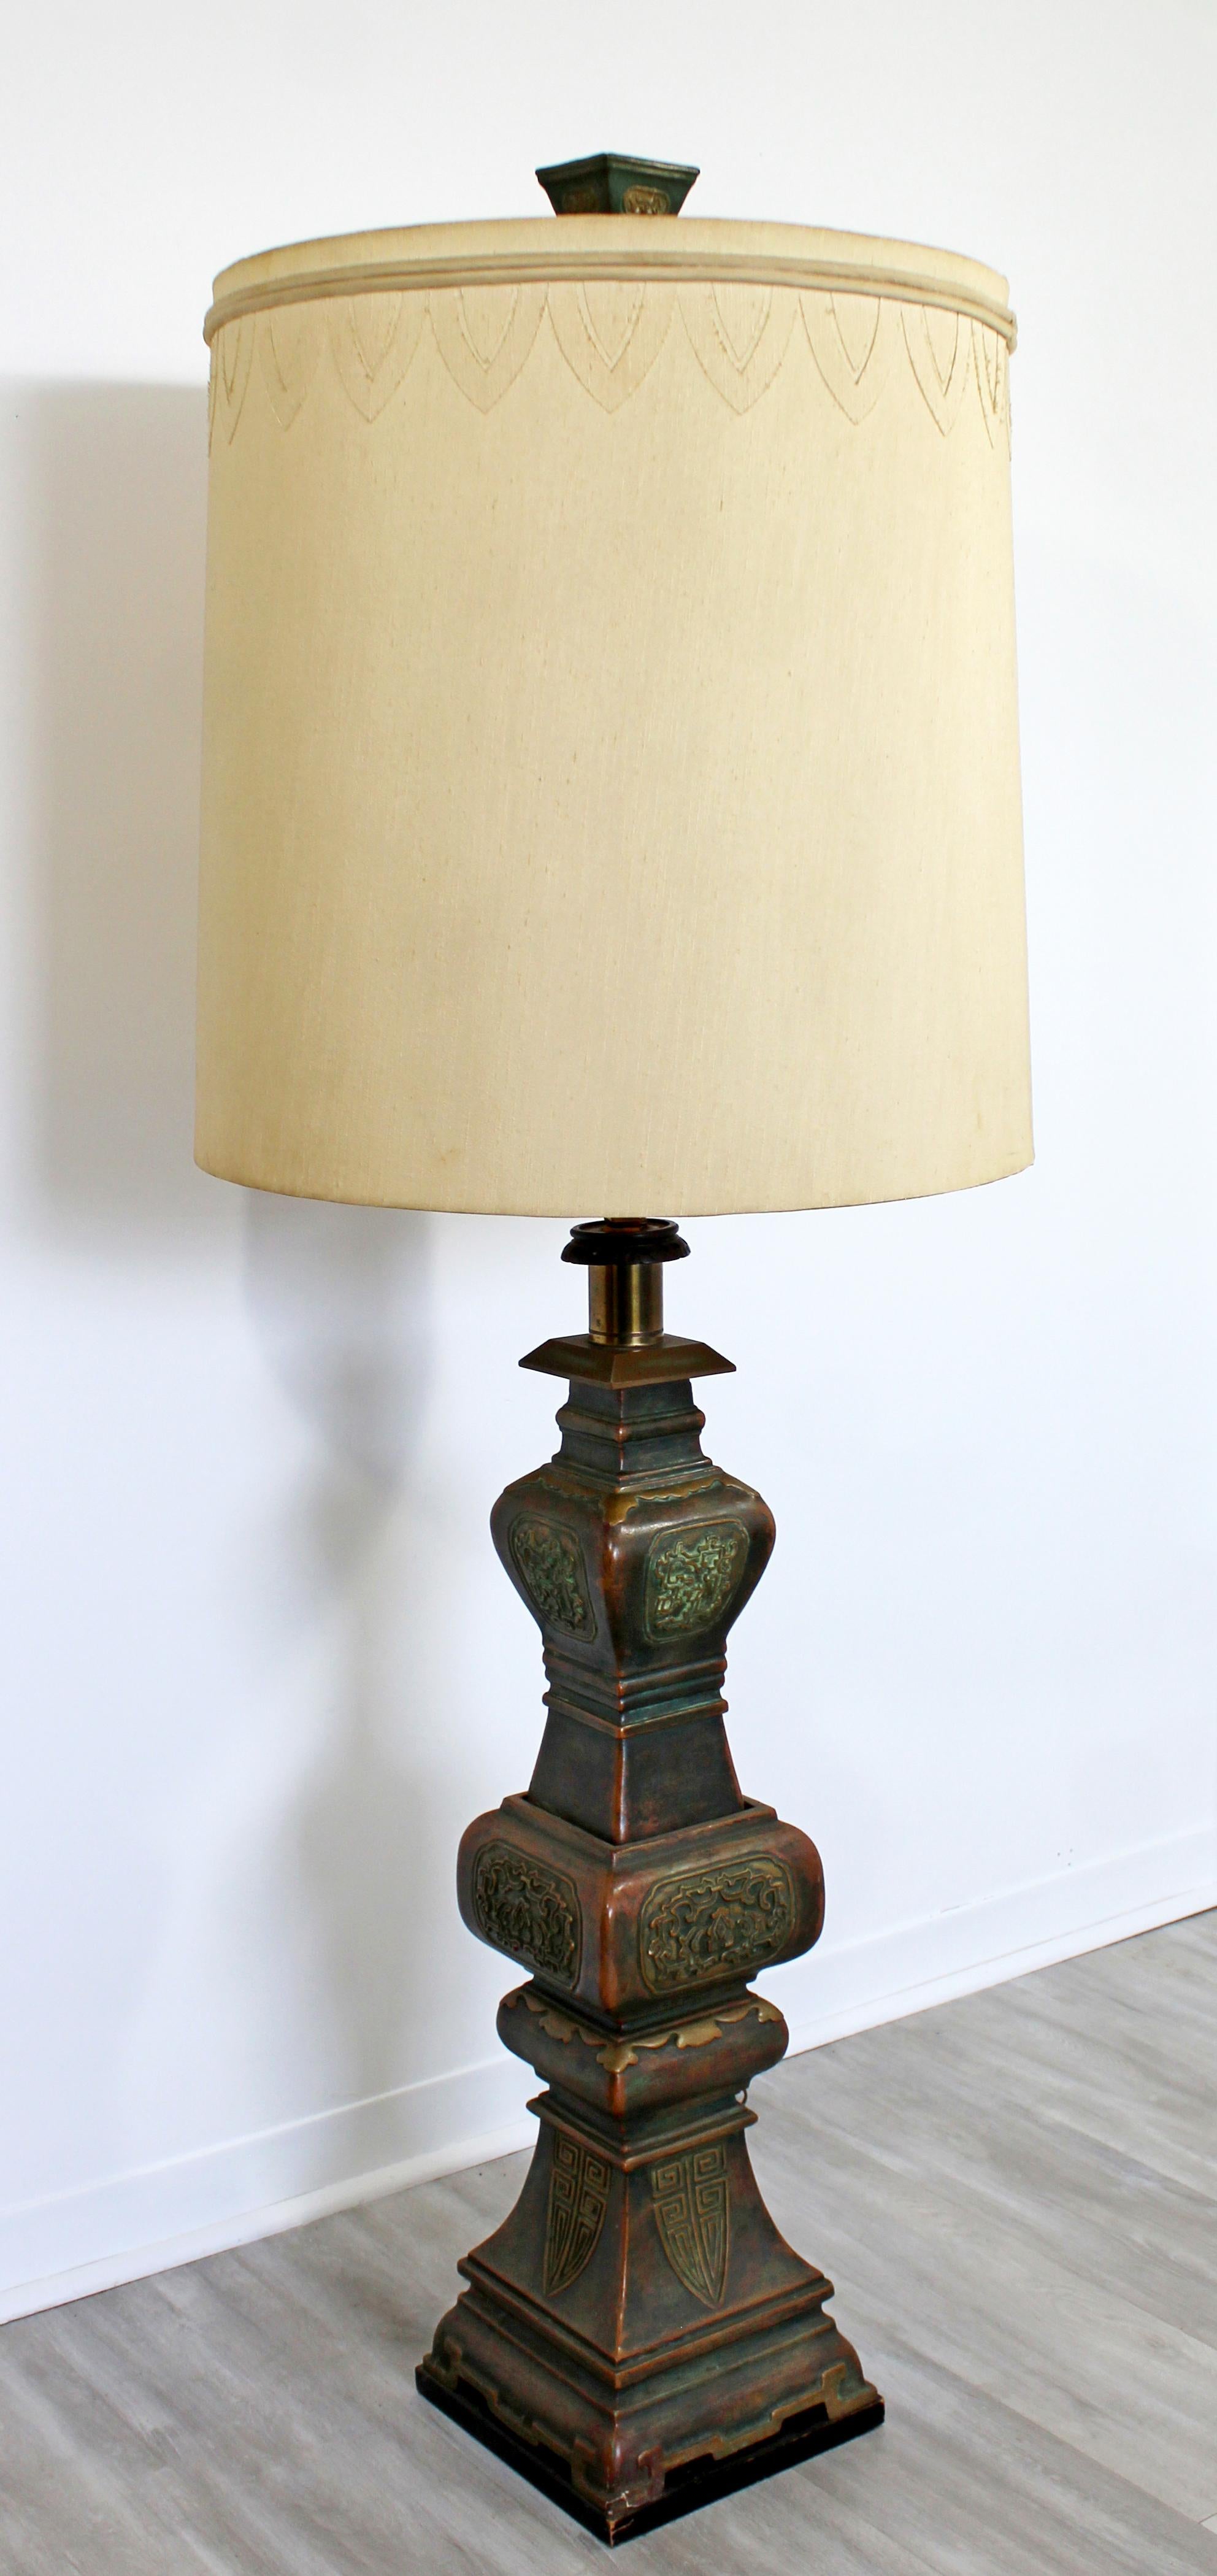 For your consideration is a truly magnificent, bronze and Italian ceramic floor lamp, with an Asian motif and original shade, from Marbro, circa 1950s. In excellent vintage condition. The dimensions of the lamp are 10.5